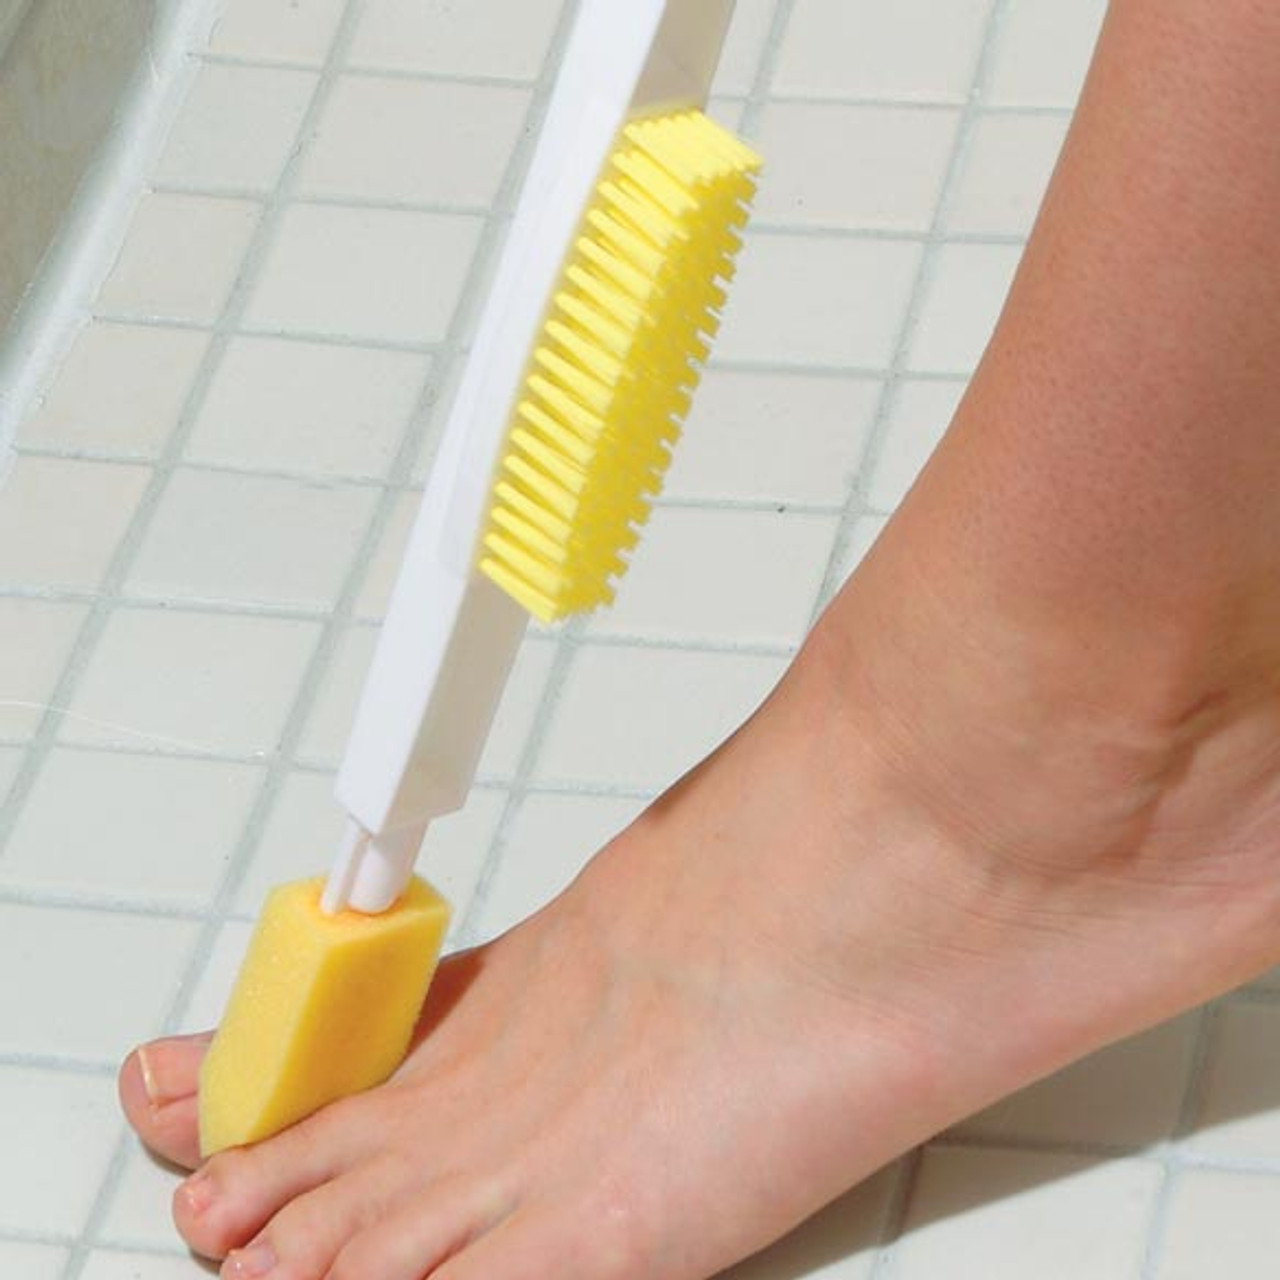 Long Handled Toe Washer and Foot Brush - Clean Between Toes Brush